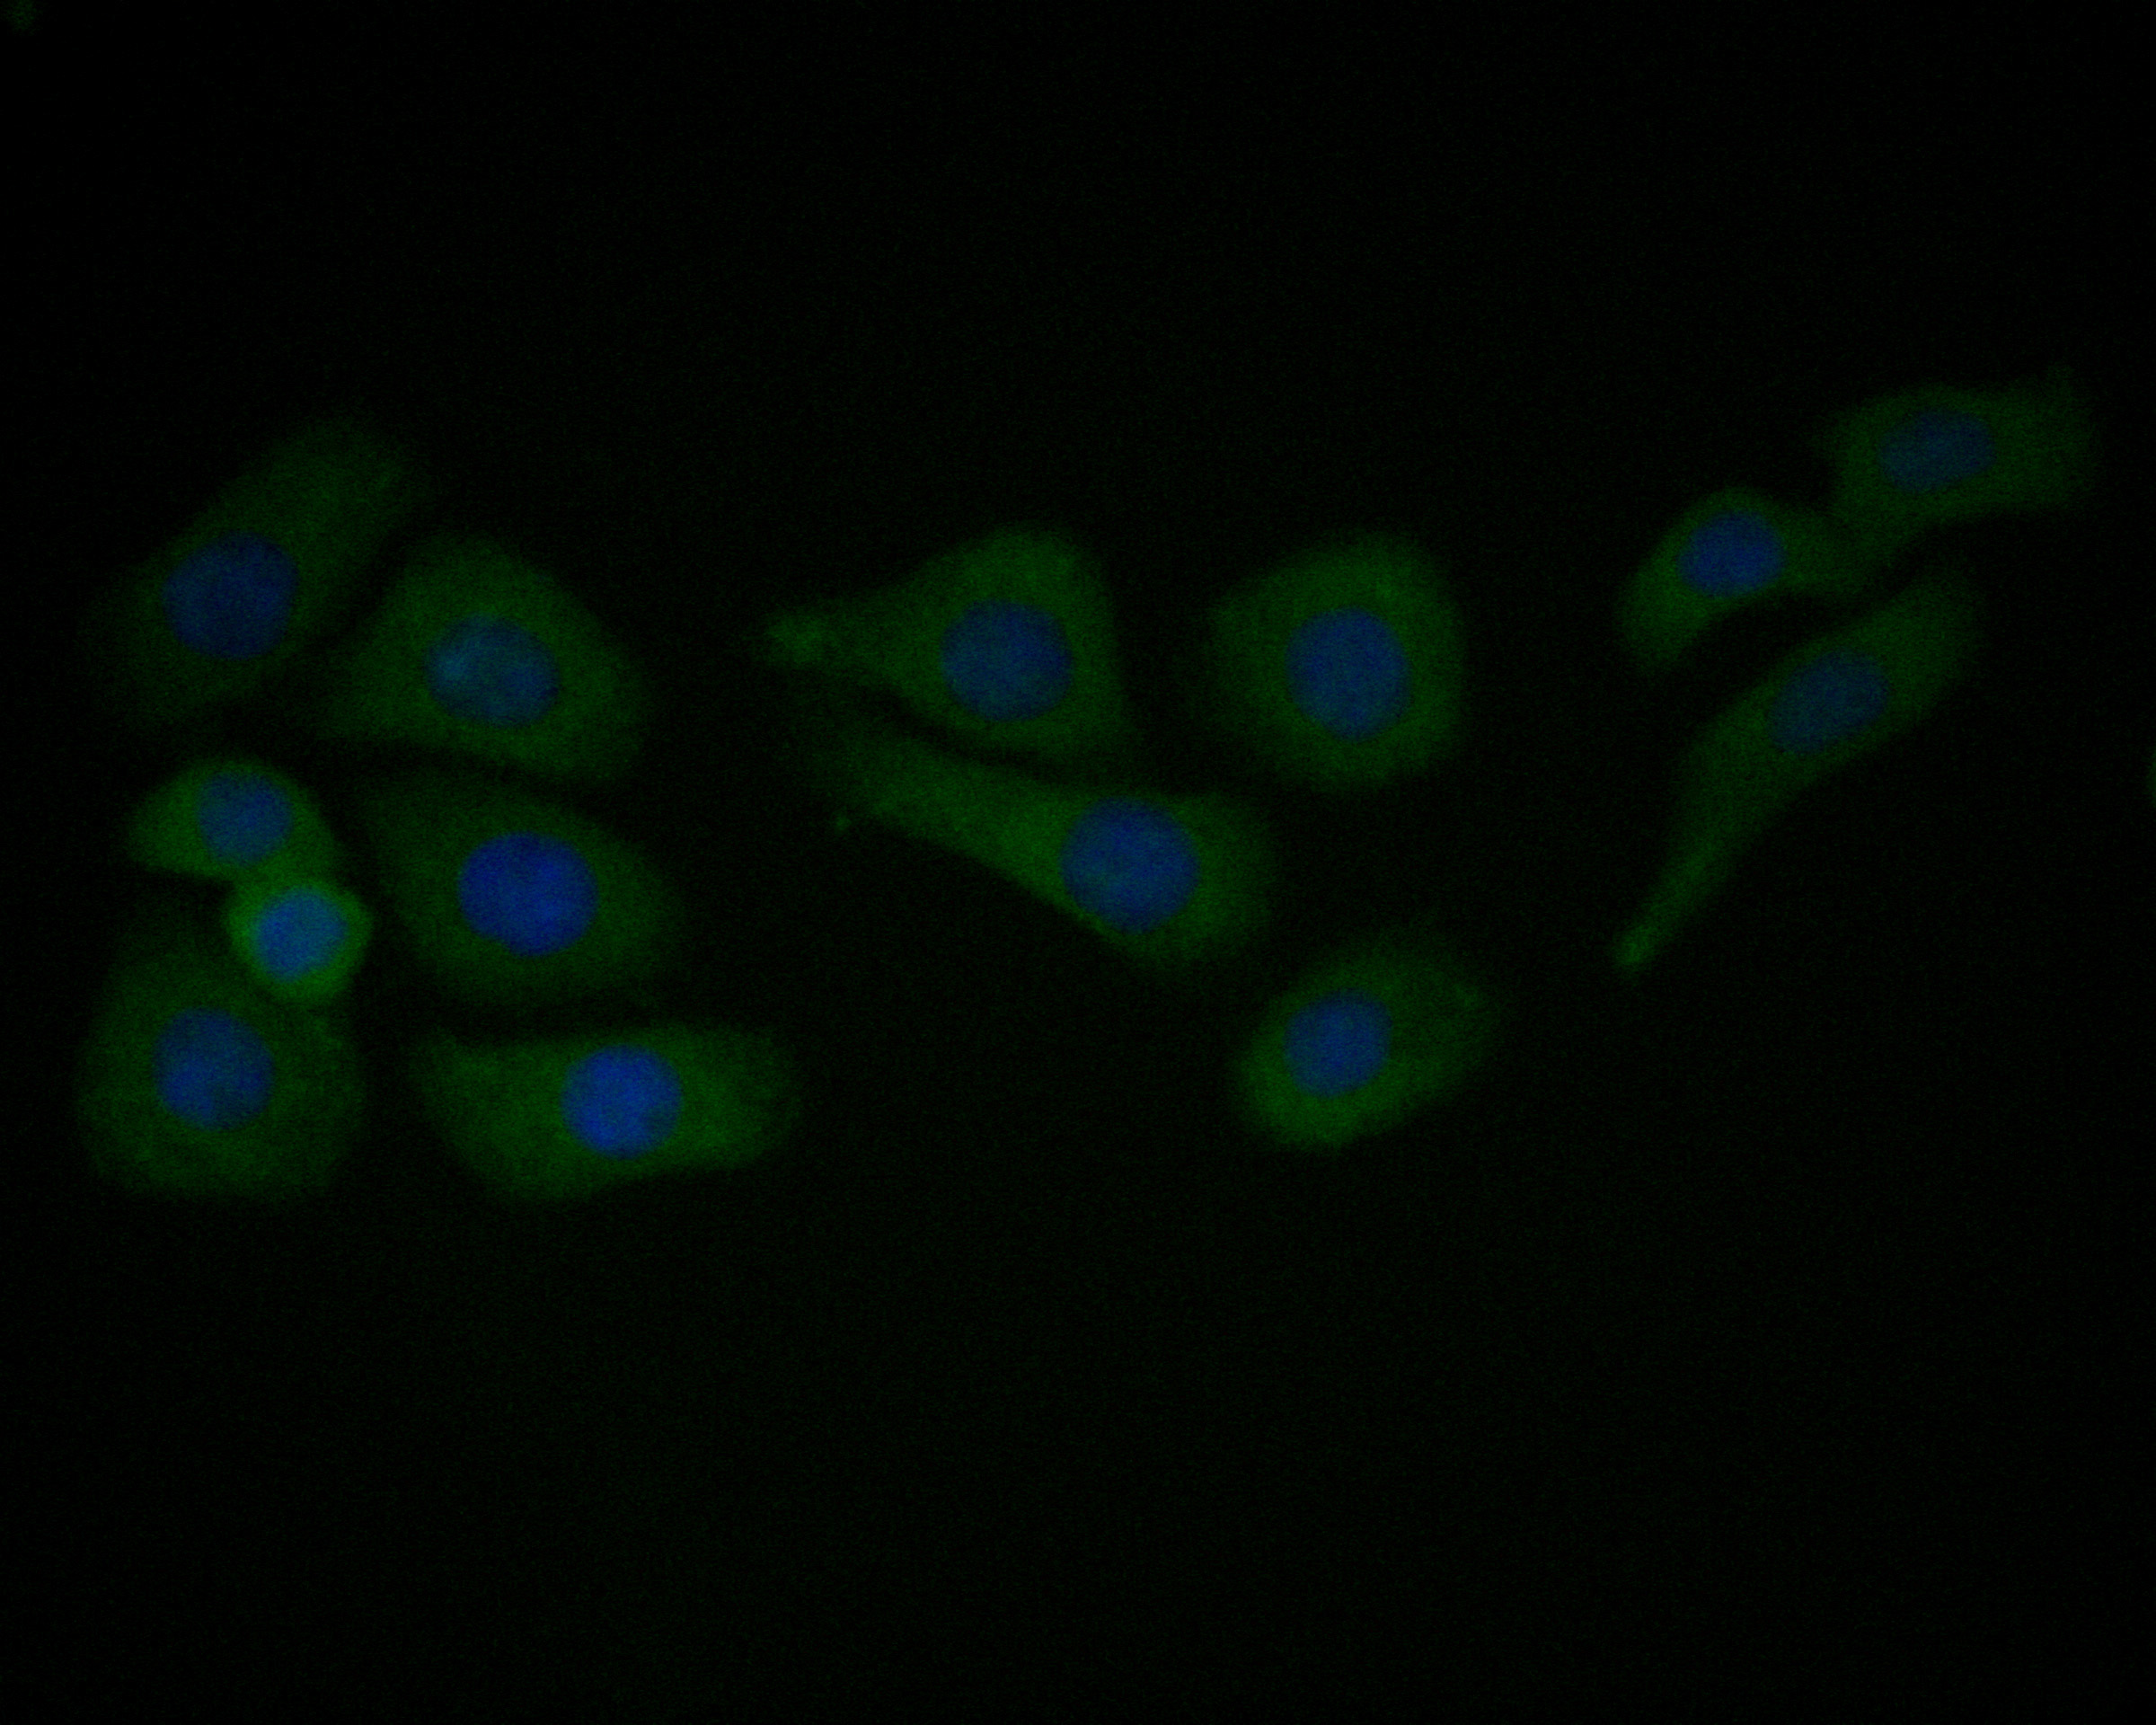 ICC staining of Caveolin-1 in SKOV-3 cells (green). Formalin fixed cells were permeabilized with 0.1% Triton X-100 in TBS for 10 minutes at room temperature and blocked with 1% Blocker BSA for 15 minutes at room temperature. Cells were probed with the primary antibody (EM1901-87, 1/50) for 1 hour at room temperature, washed with PBS. Alexa Fluor®488 Goat anti-Mouse IgG was used as the secondary antibody at 1/1,000 dilution. The nuclear counter stain is DAPI (blue).